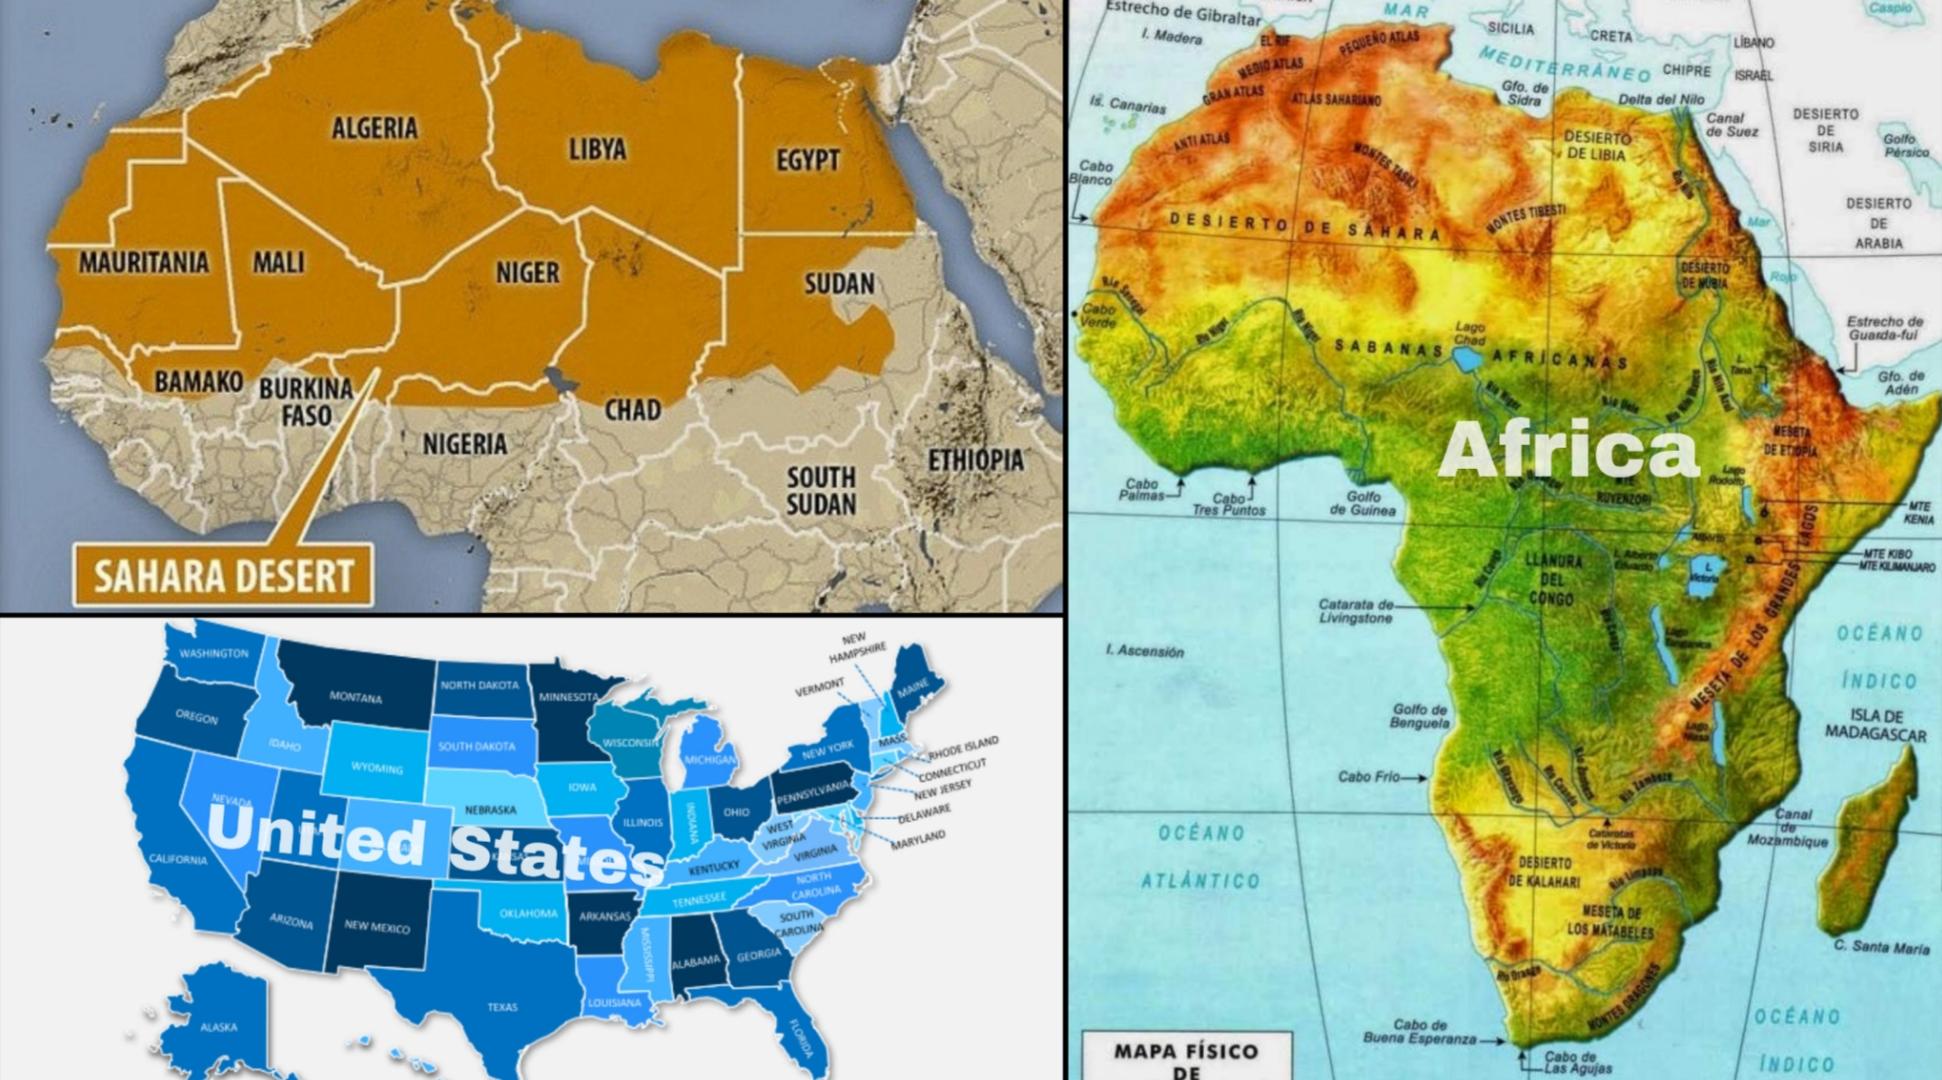 Africa’s Sahara Desert is more times bigger than United States of America